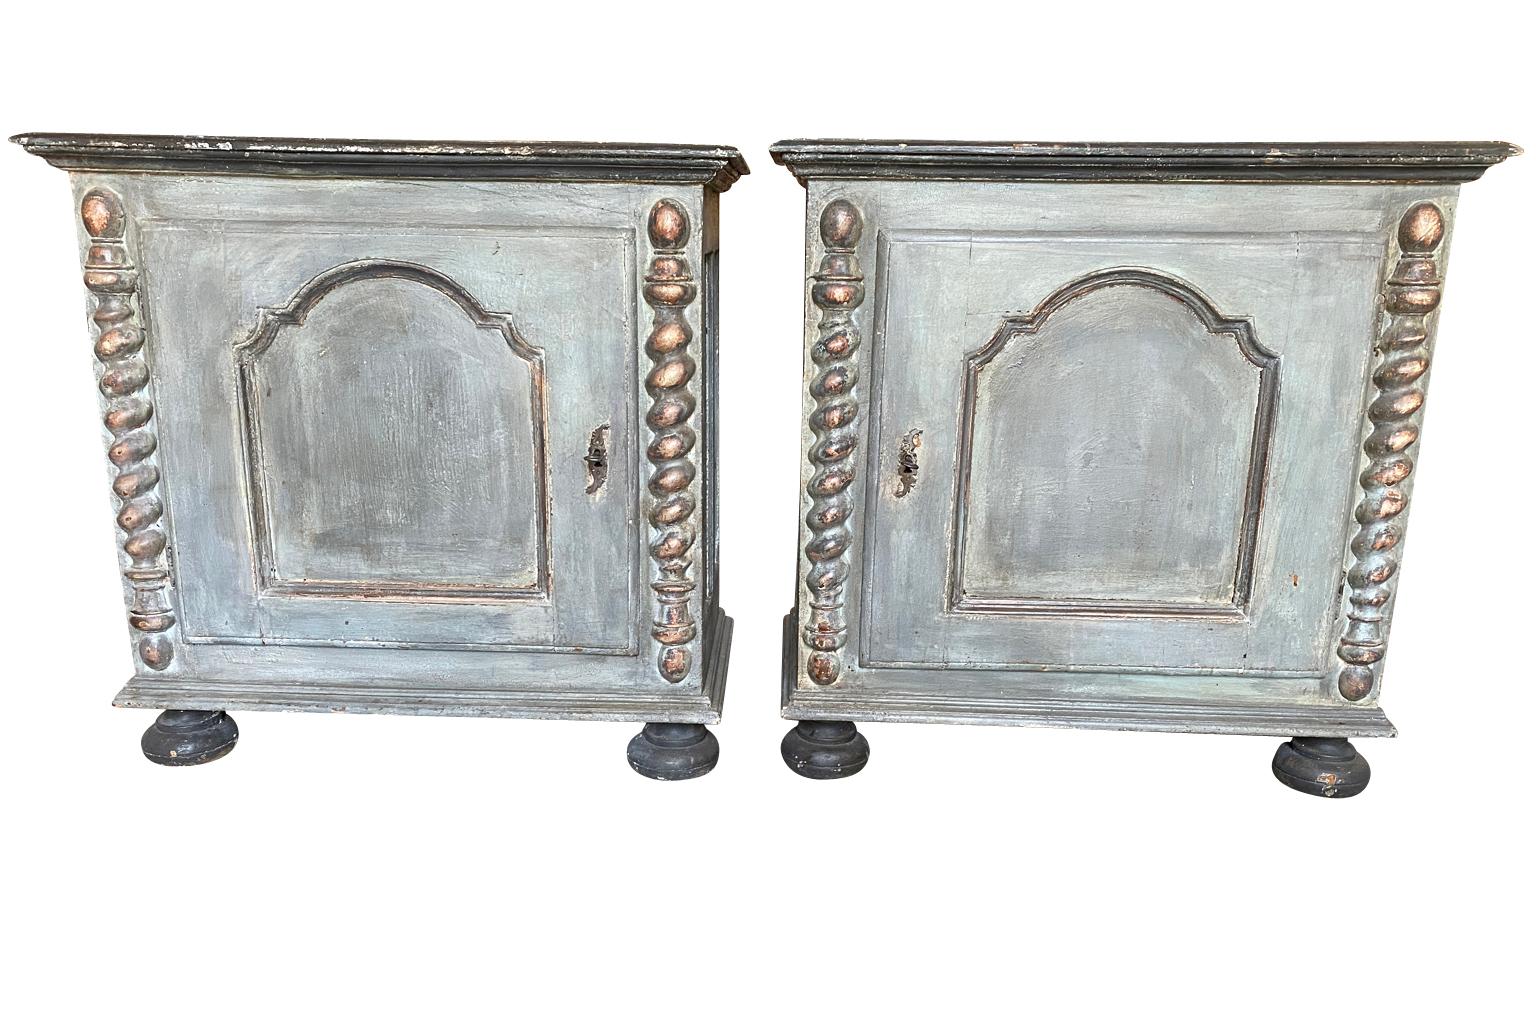 A delightful pair of mid-19th century buffets from the Genoa region of Italy. Wonderfully constructed from painted wood with a single door raised on bun feet.